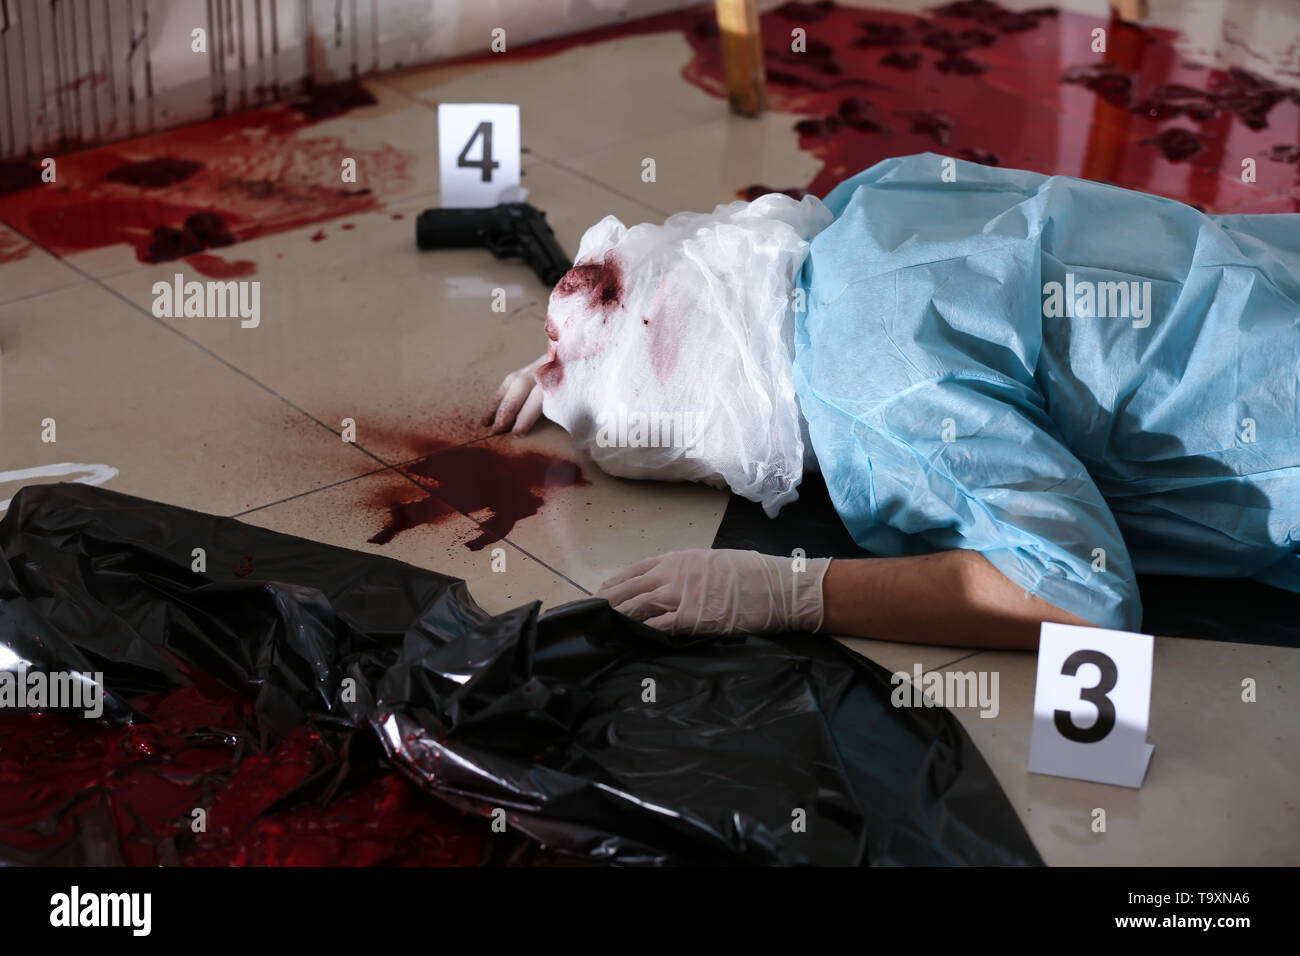 Dead victim at the place of crime Stock Photo